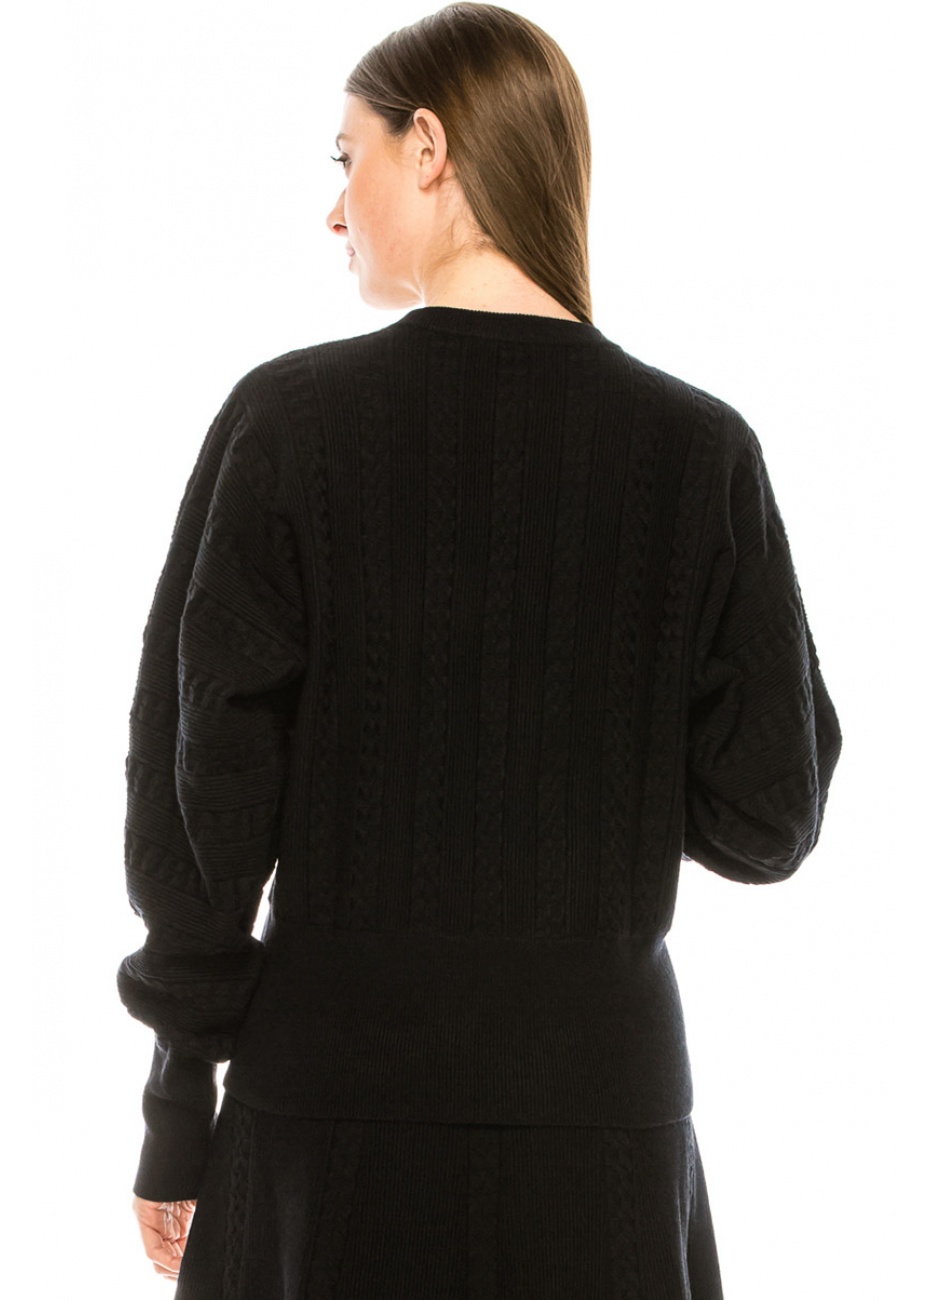 Sweater with volume sleeves in black